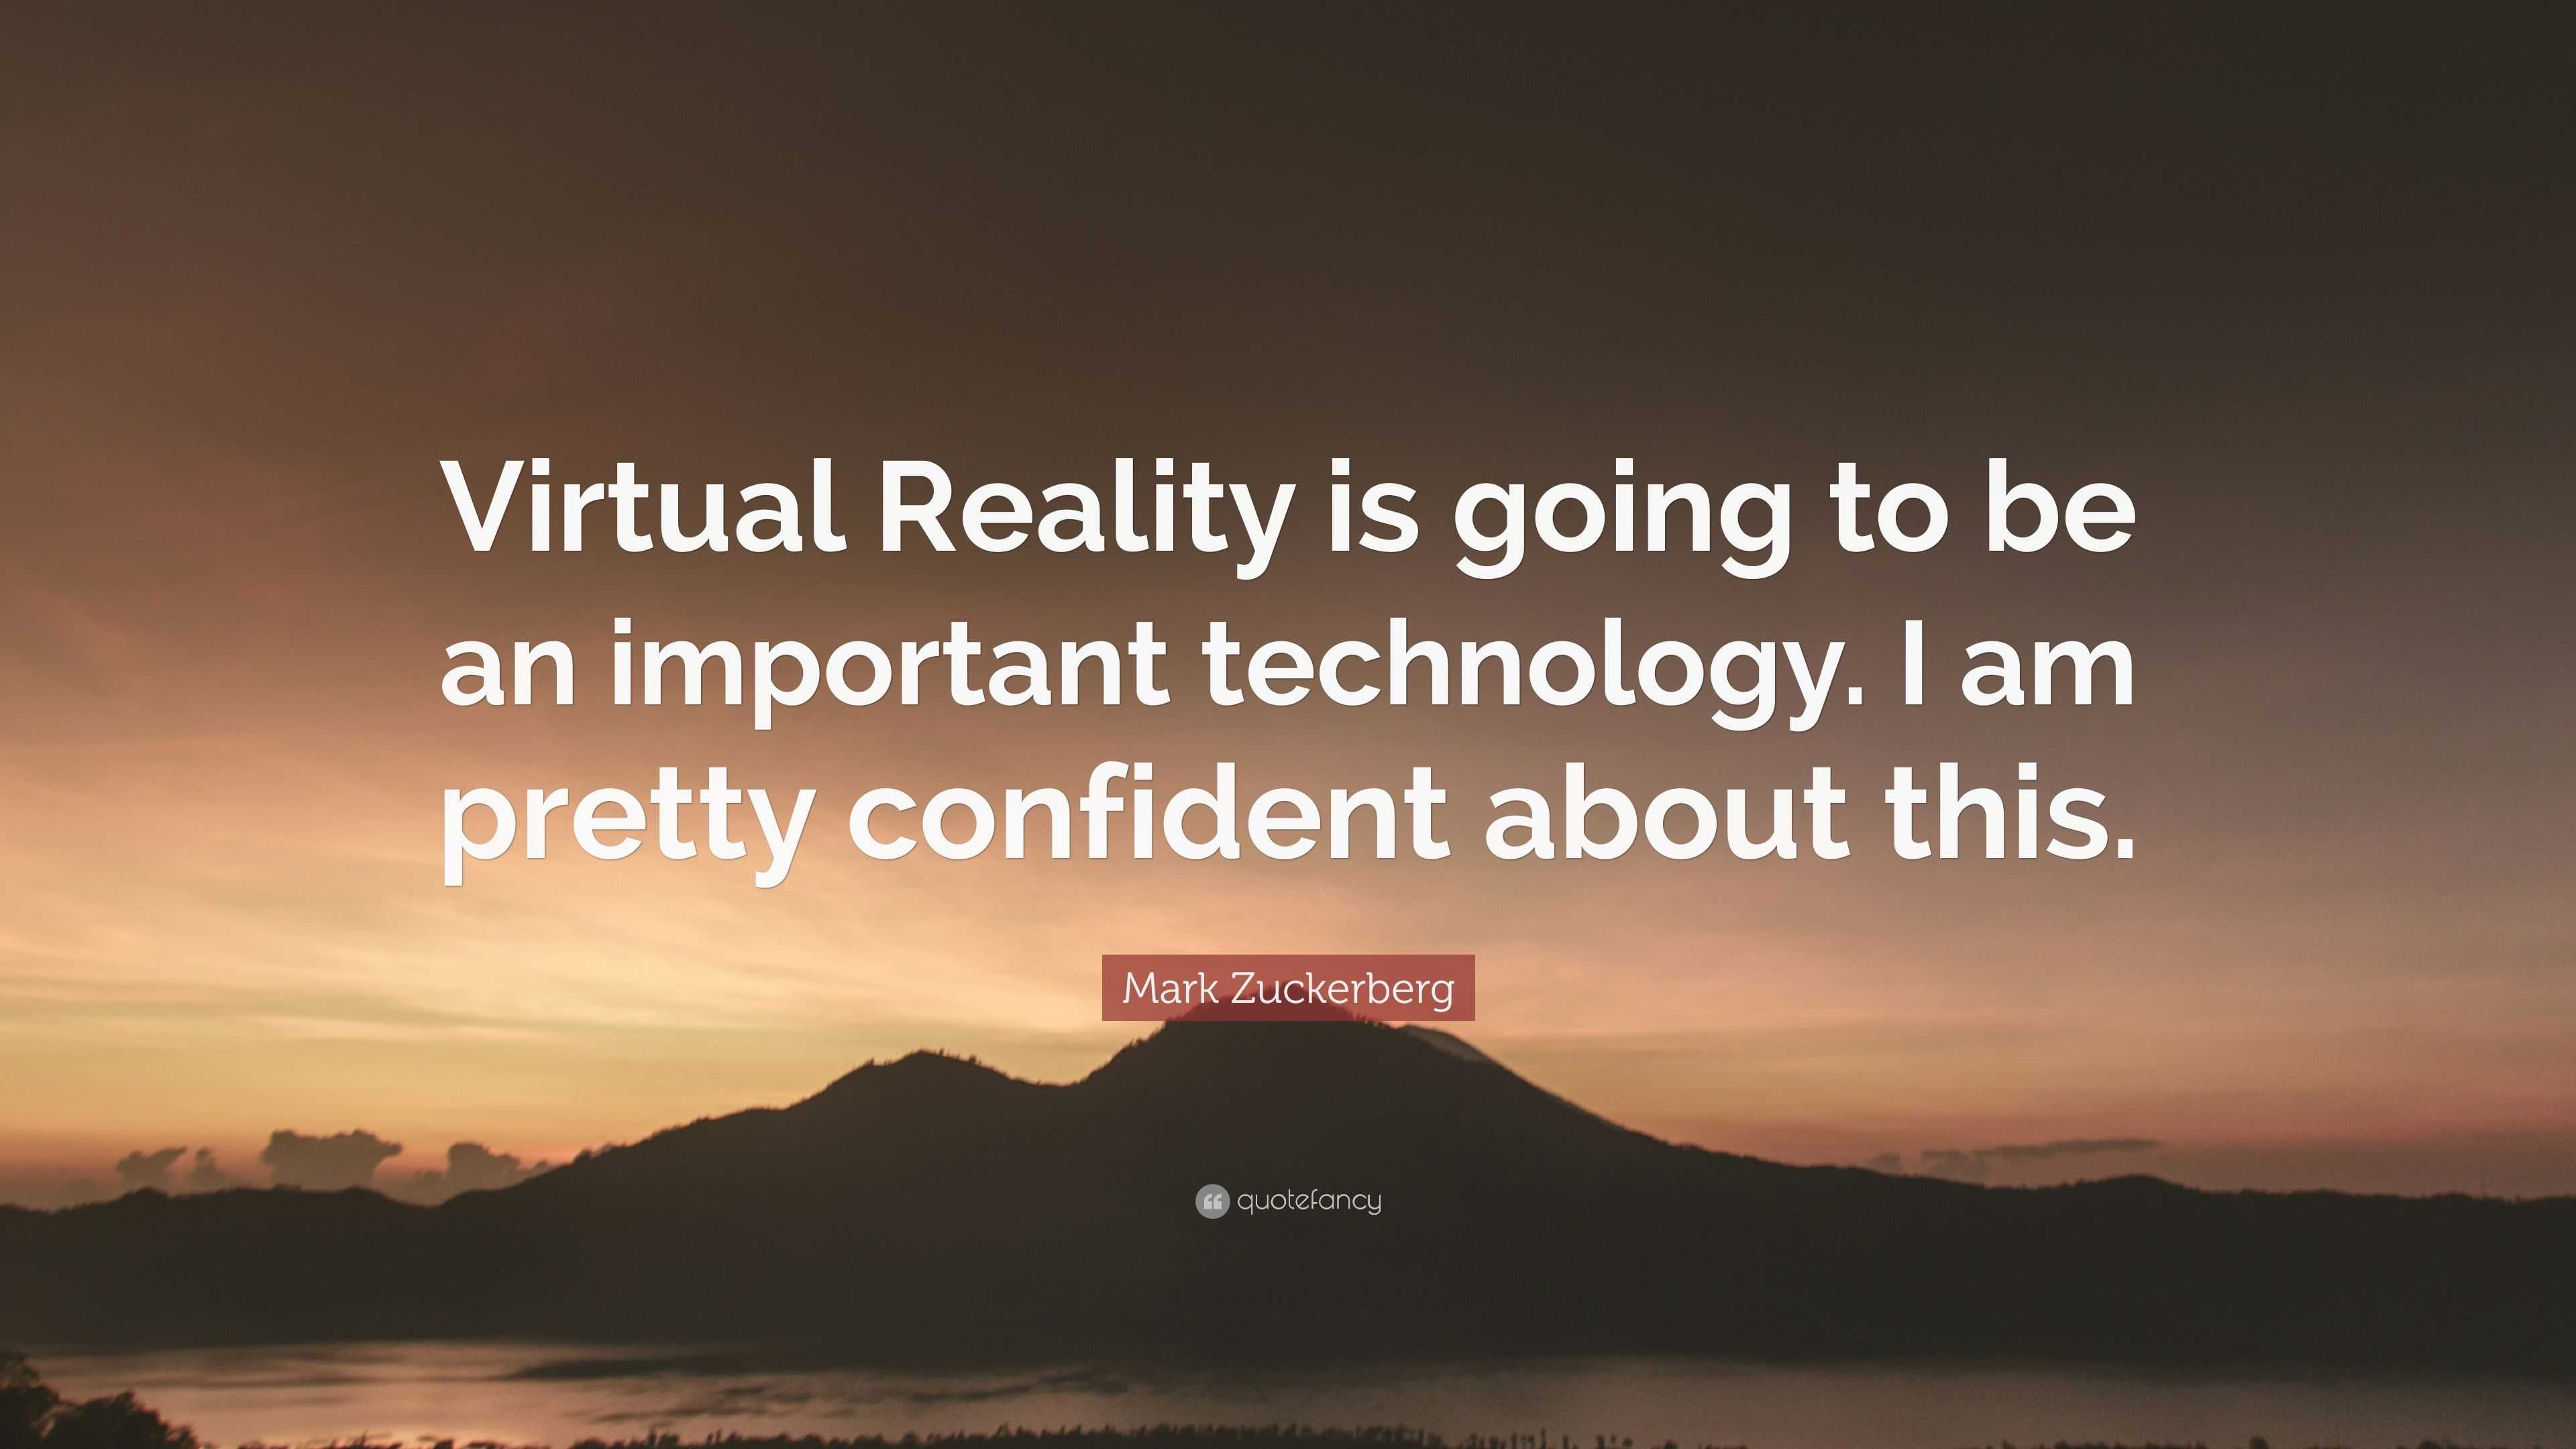 Mark Zuckerberg Quote: “Virtual Reality is going to be an important ...